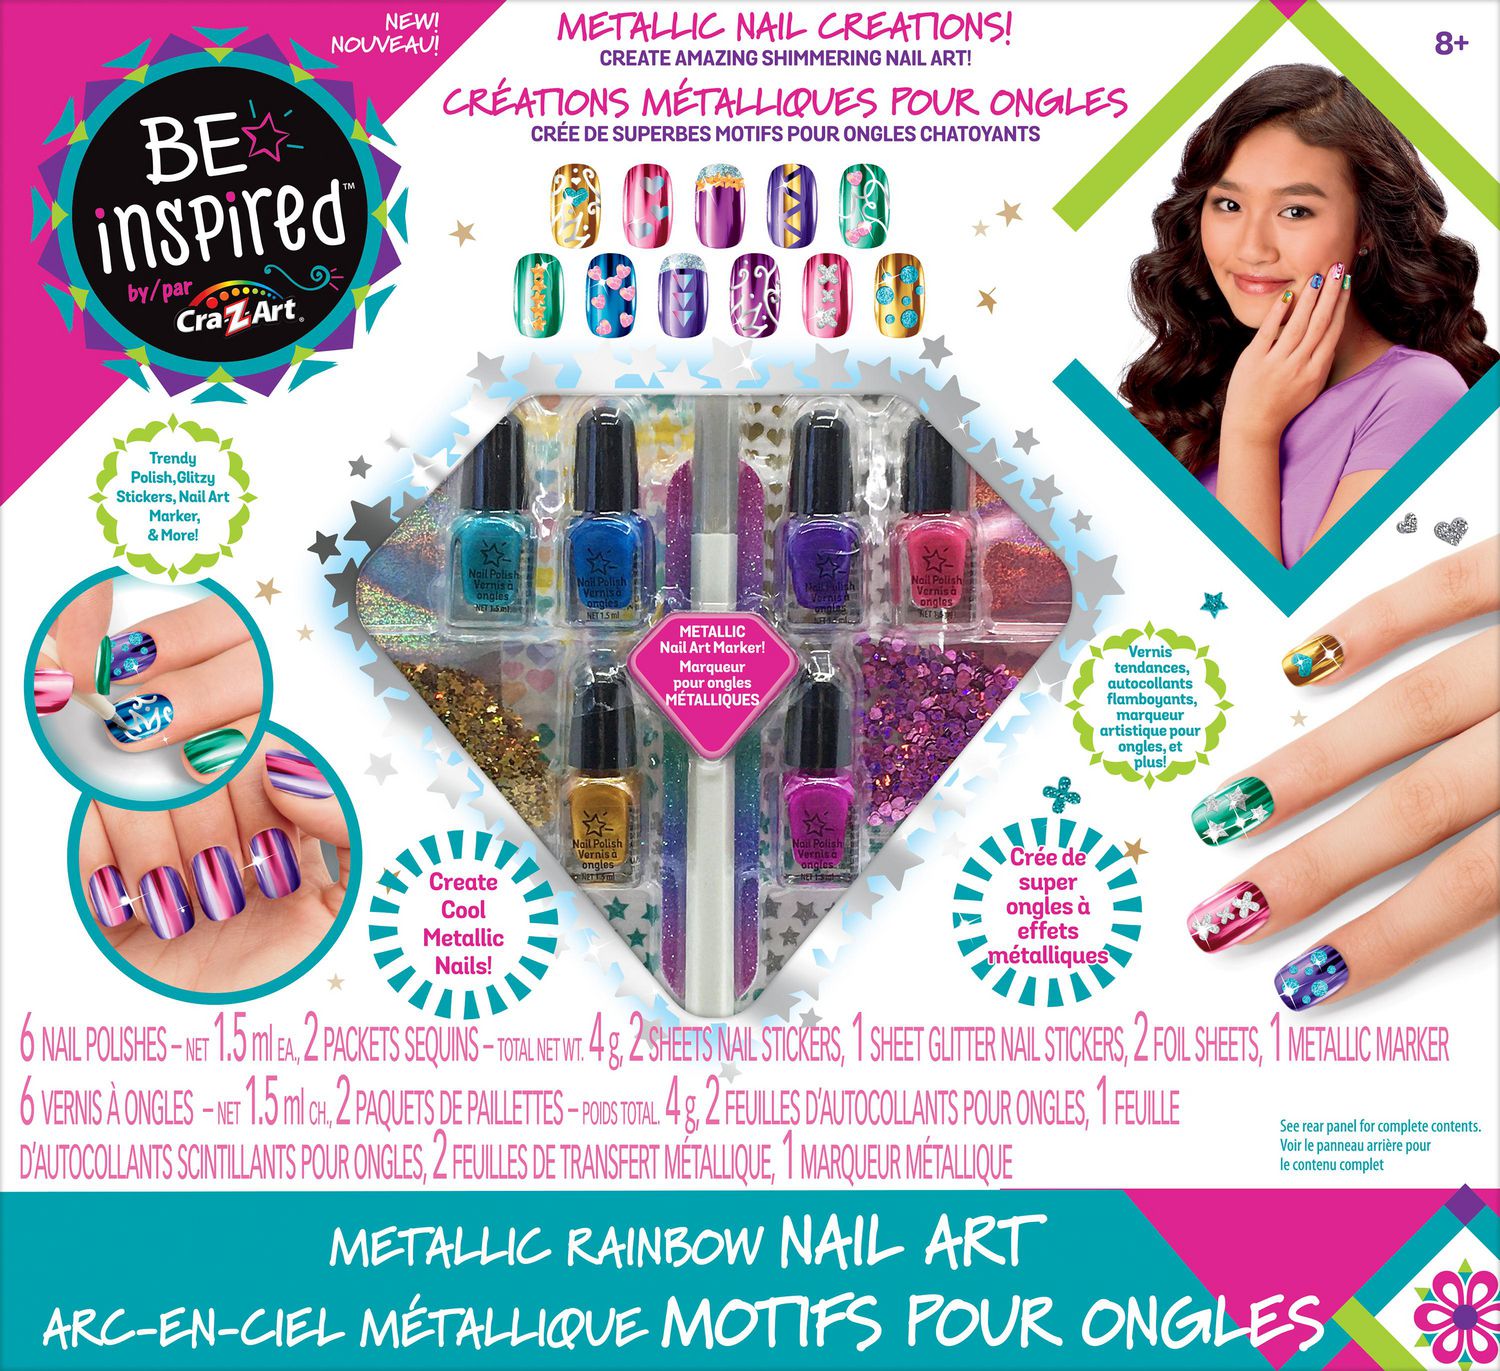 Nail Art Set Kit With, 2 Rectangular Plates, 1 Silicon Stamper And Scrapper  Complete Set For Beginners. - 24x7 eMall